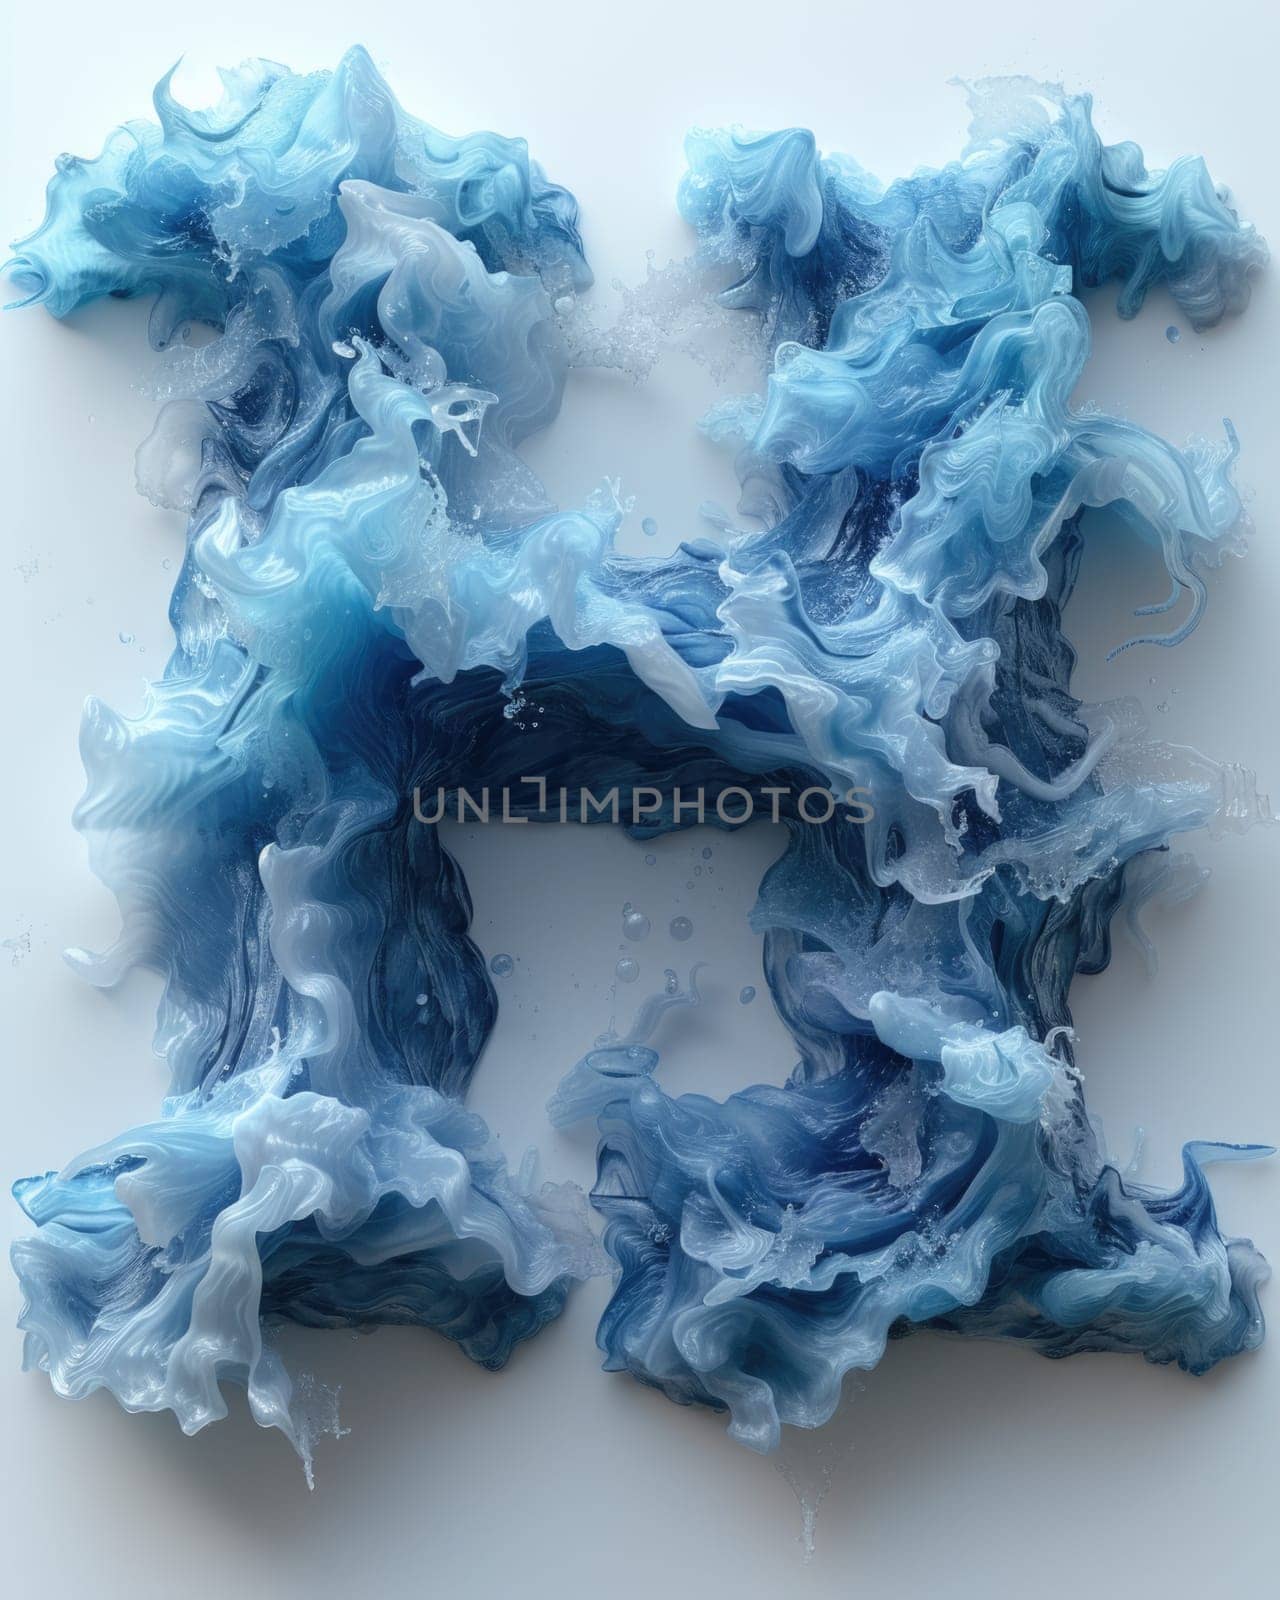 A letter made out of blue and white dye emerges as the sea engulfs the material, creating a striking visual contrast.